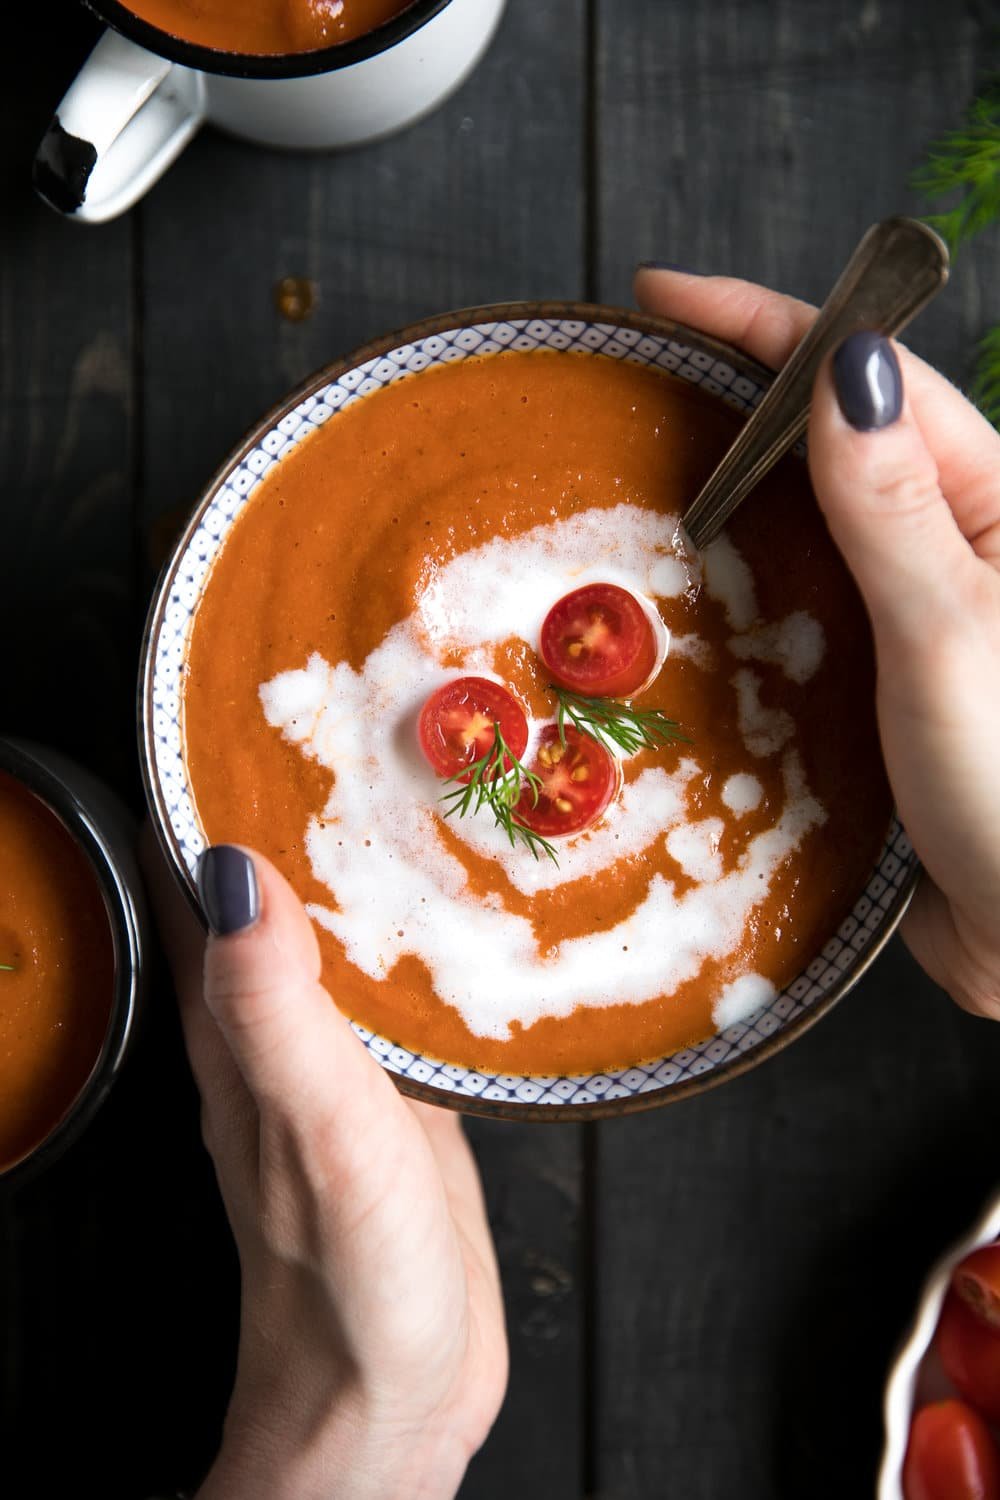 A person holding a bowl of food, with Roasted Red Pepper Soup and Tomato